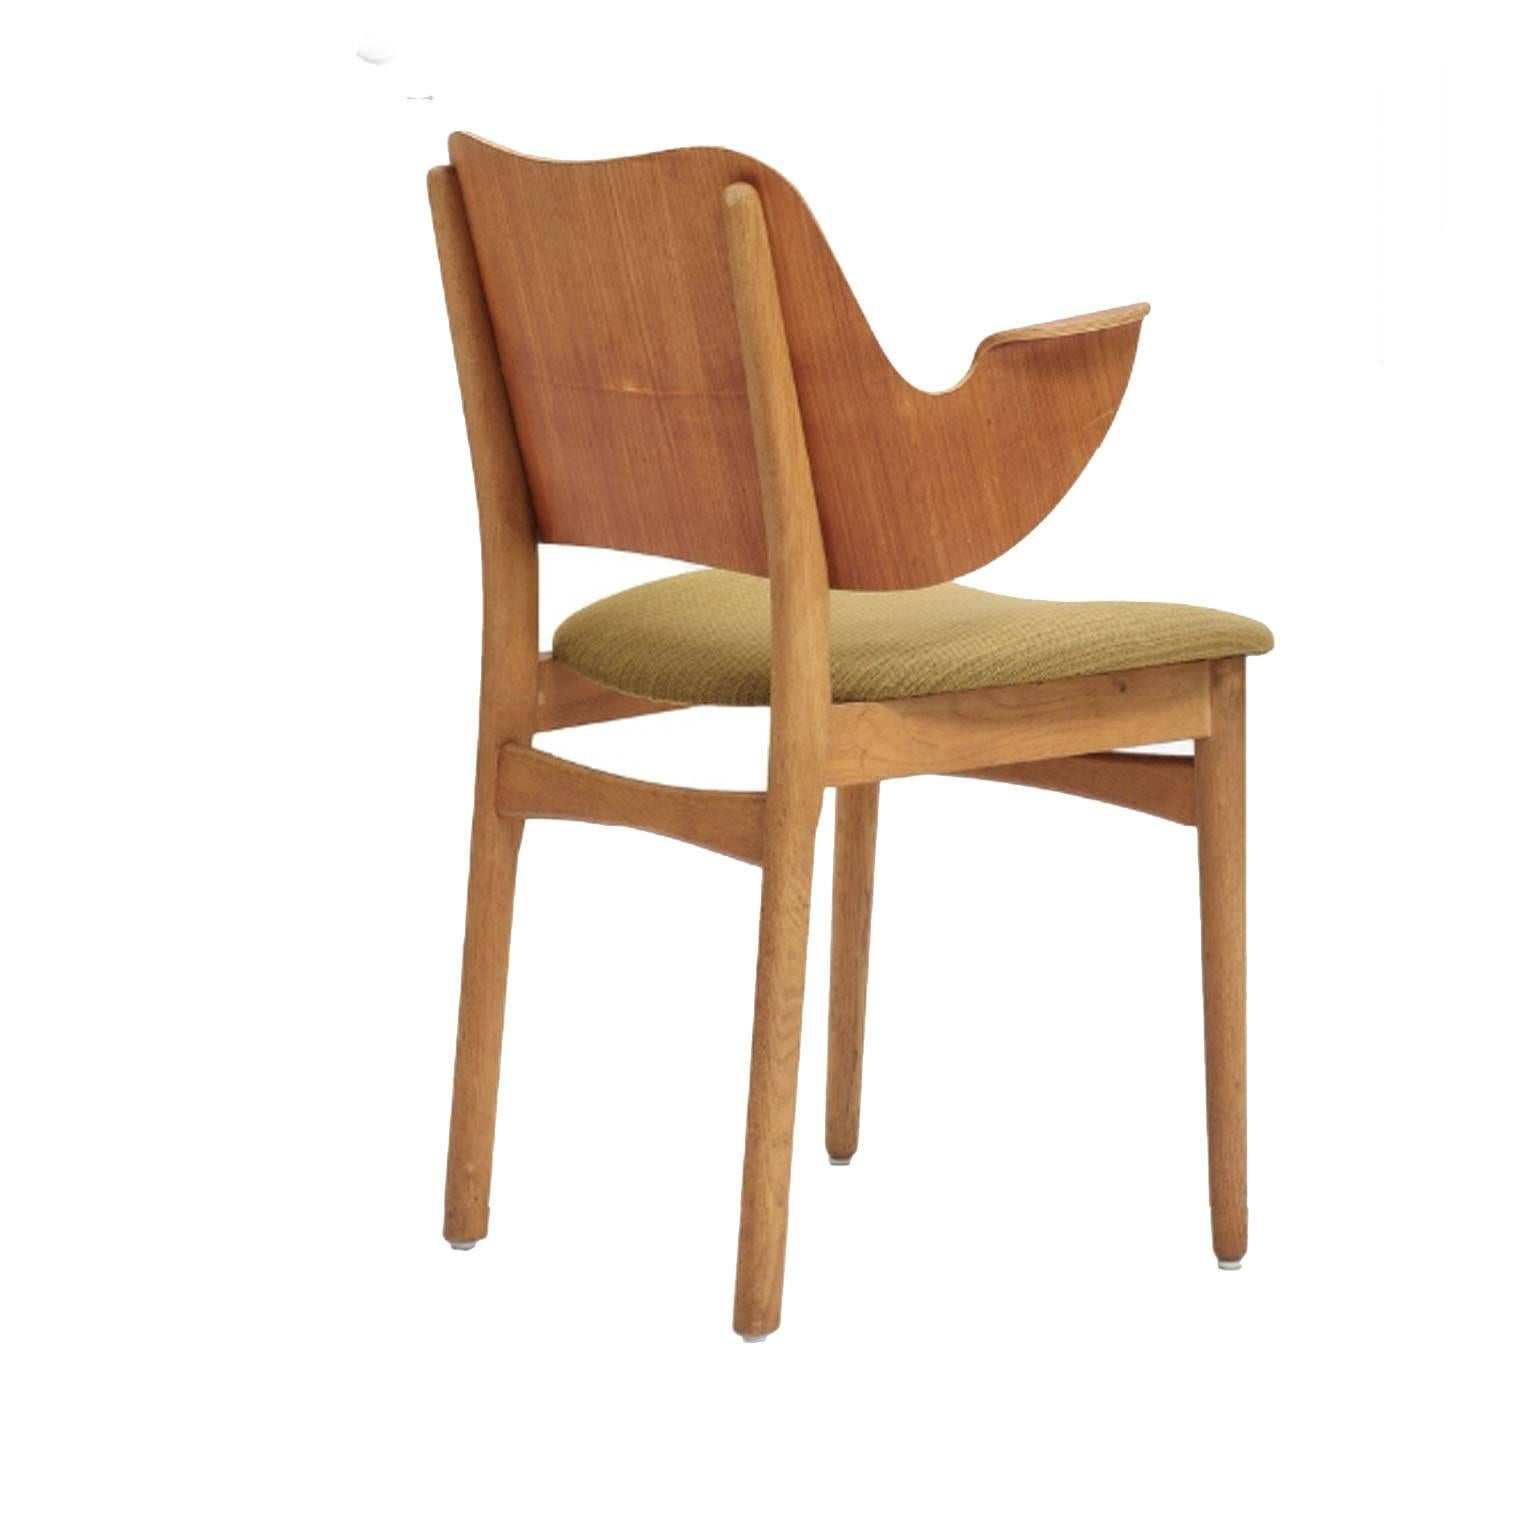 Very nice desk chair, by Arne Hovmand-Olsen, manufactured by Bramin. Armchair with oak frame, laminated moulded teak back, upholstered with green wool.